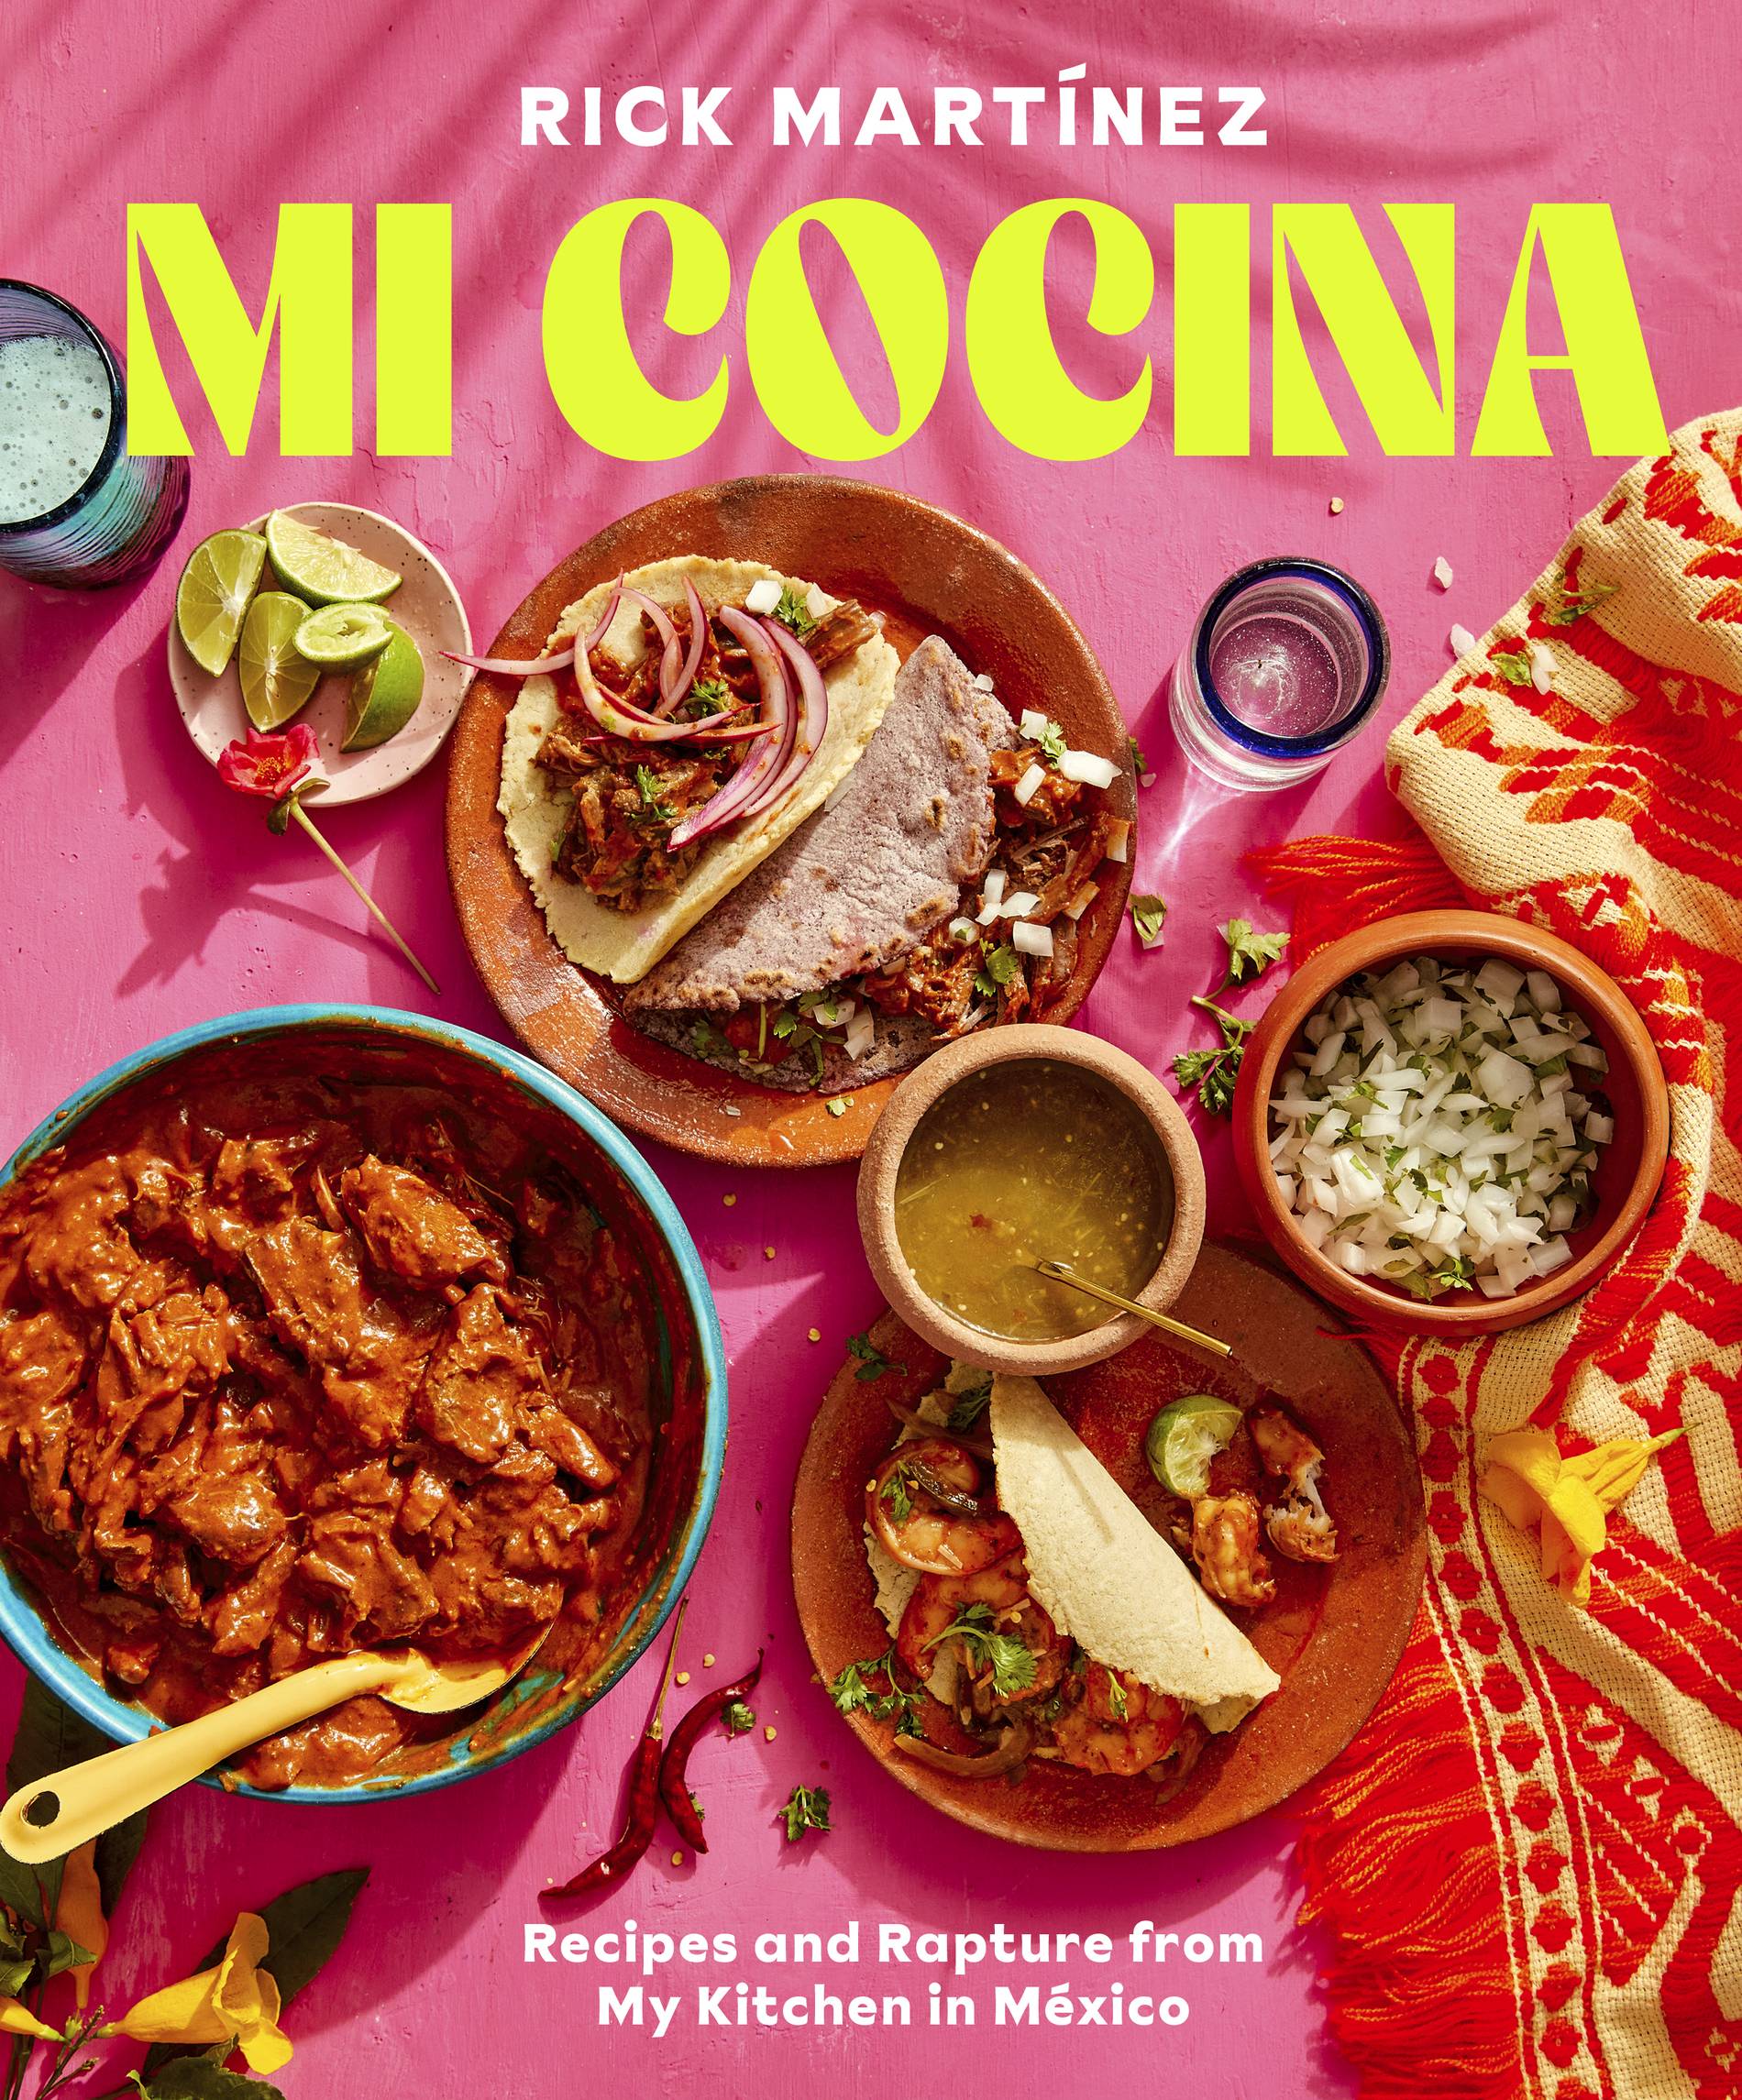 Mi Cocina: Recipes and Rapture from my Kitchen in Mexico by rick martinez